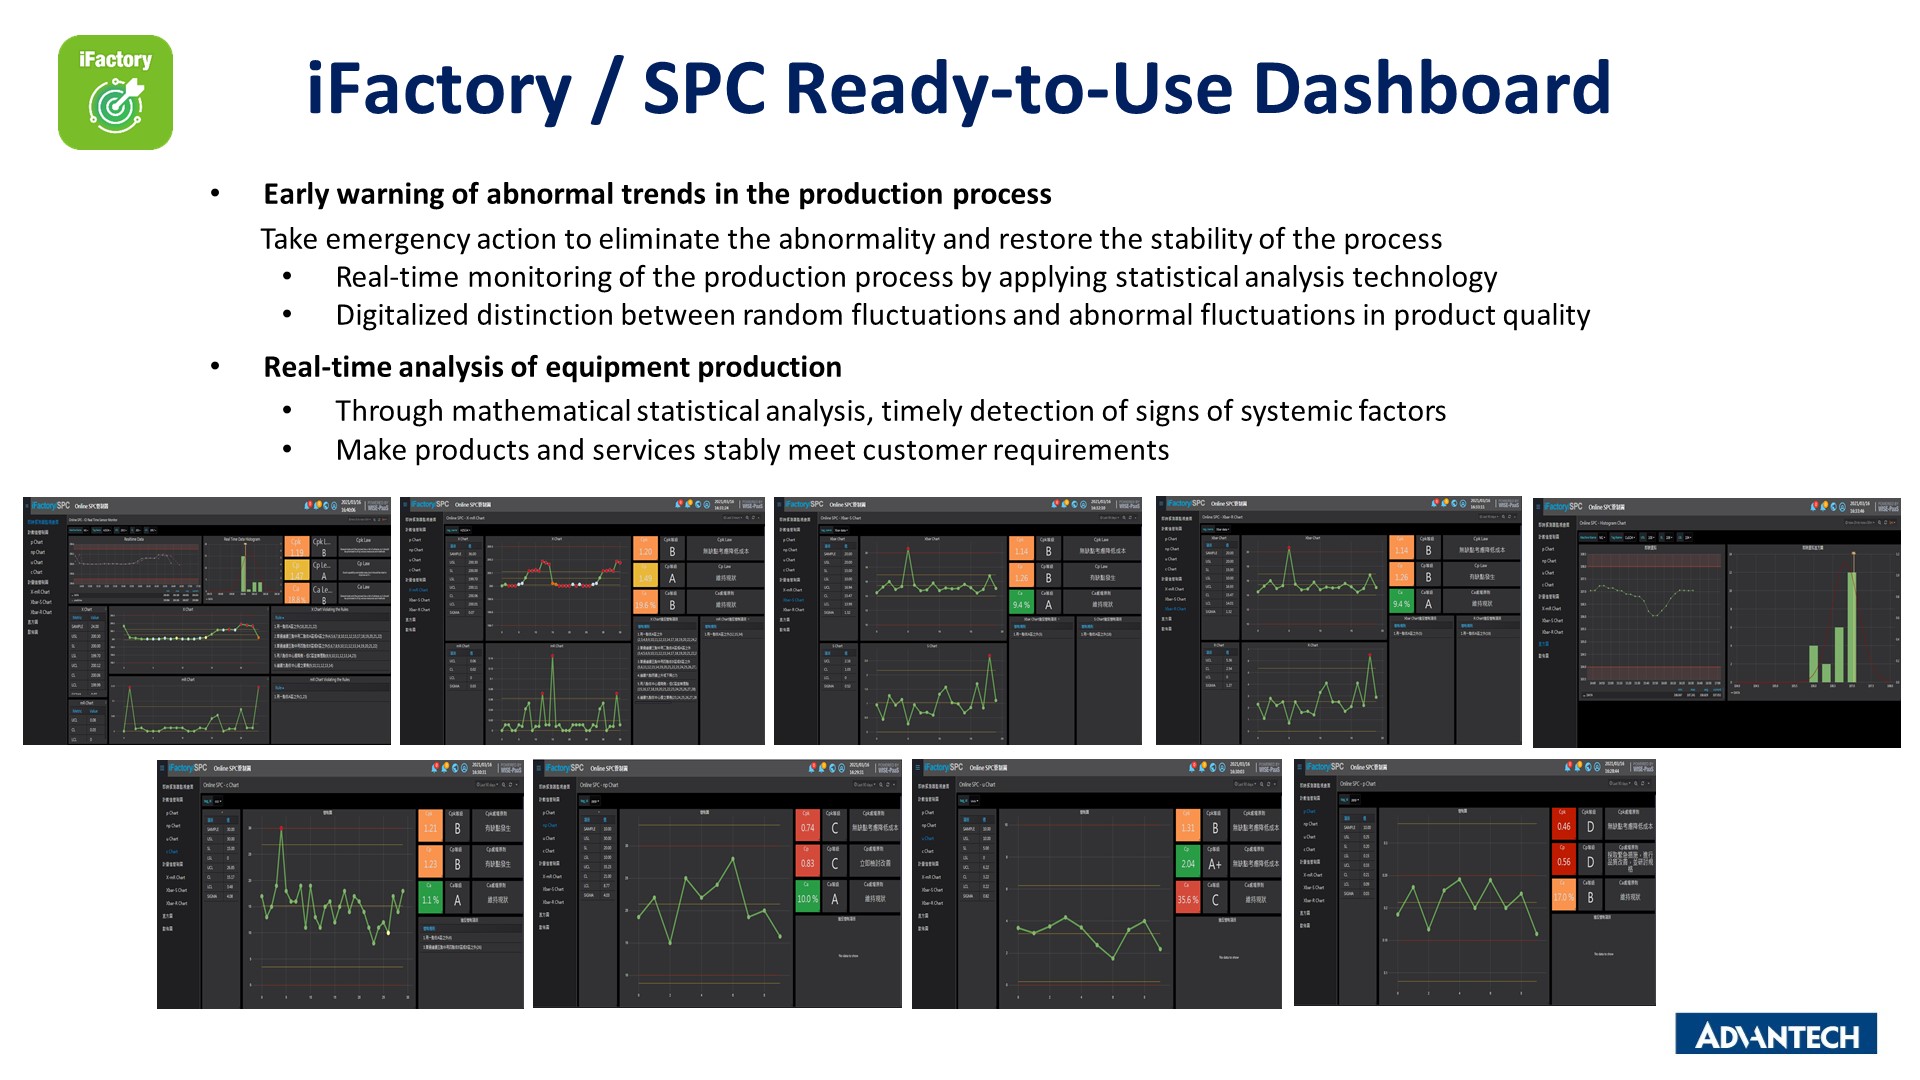 iFactory / SPC Ready-to-Use Dashboard